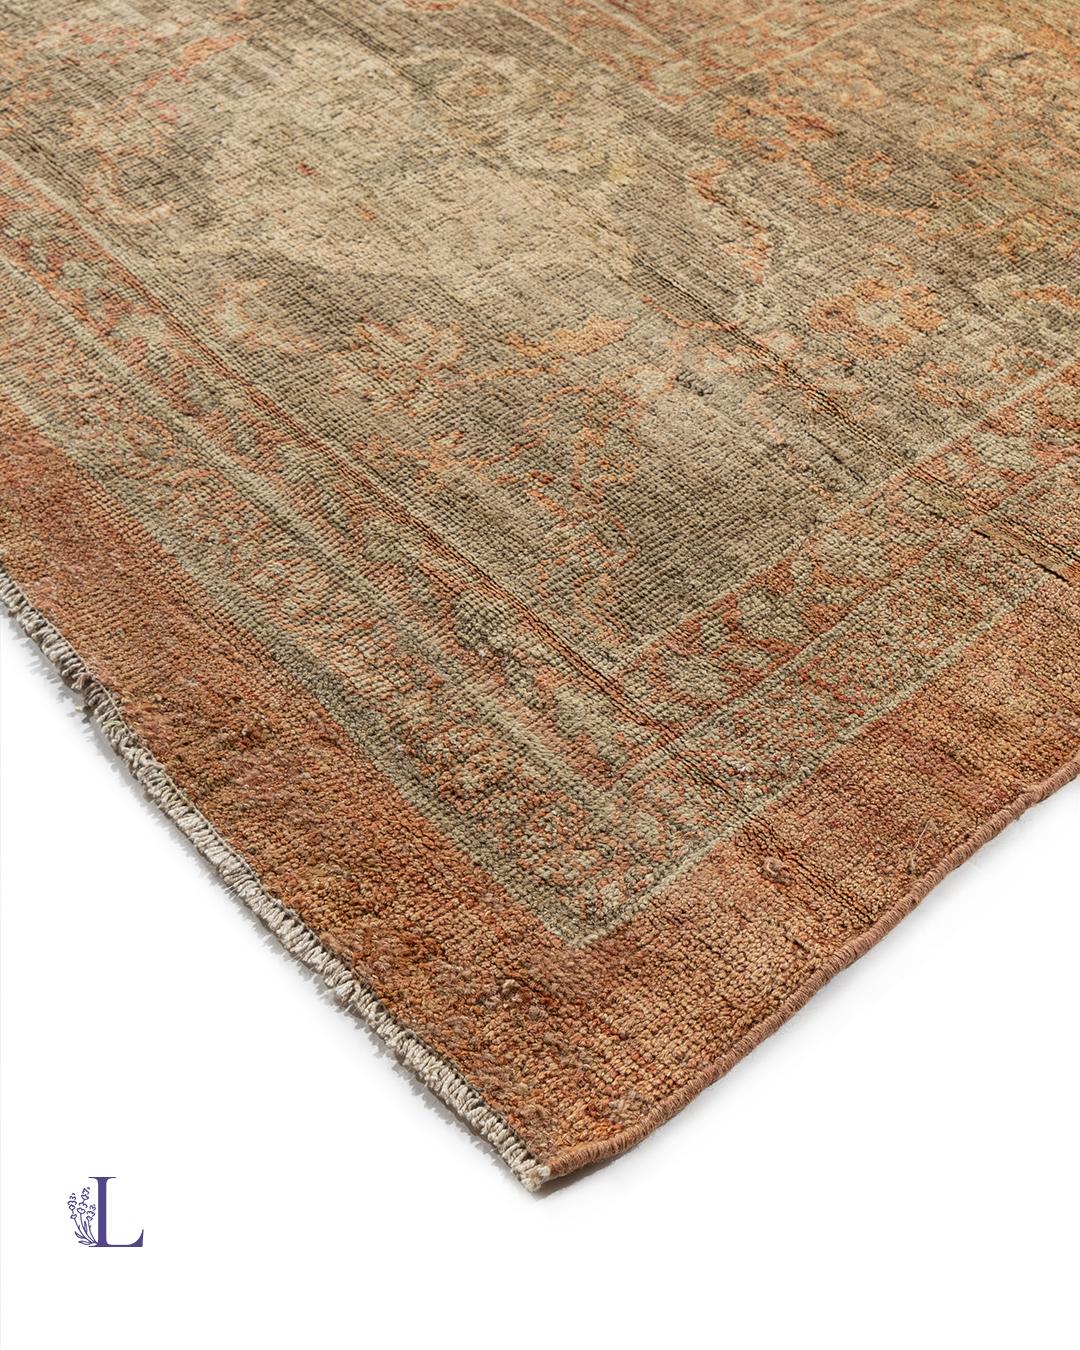 Antique Oversize Persian Sultanabad Rug  14'6 x 25' For Sale 3